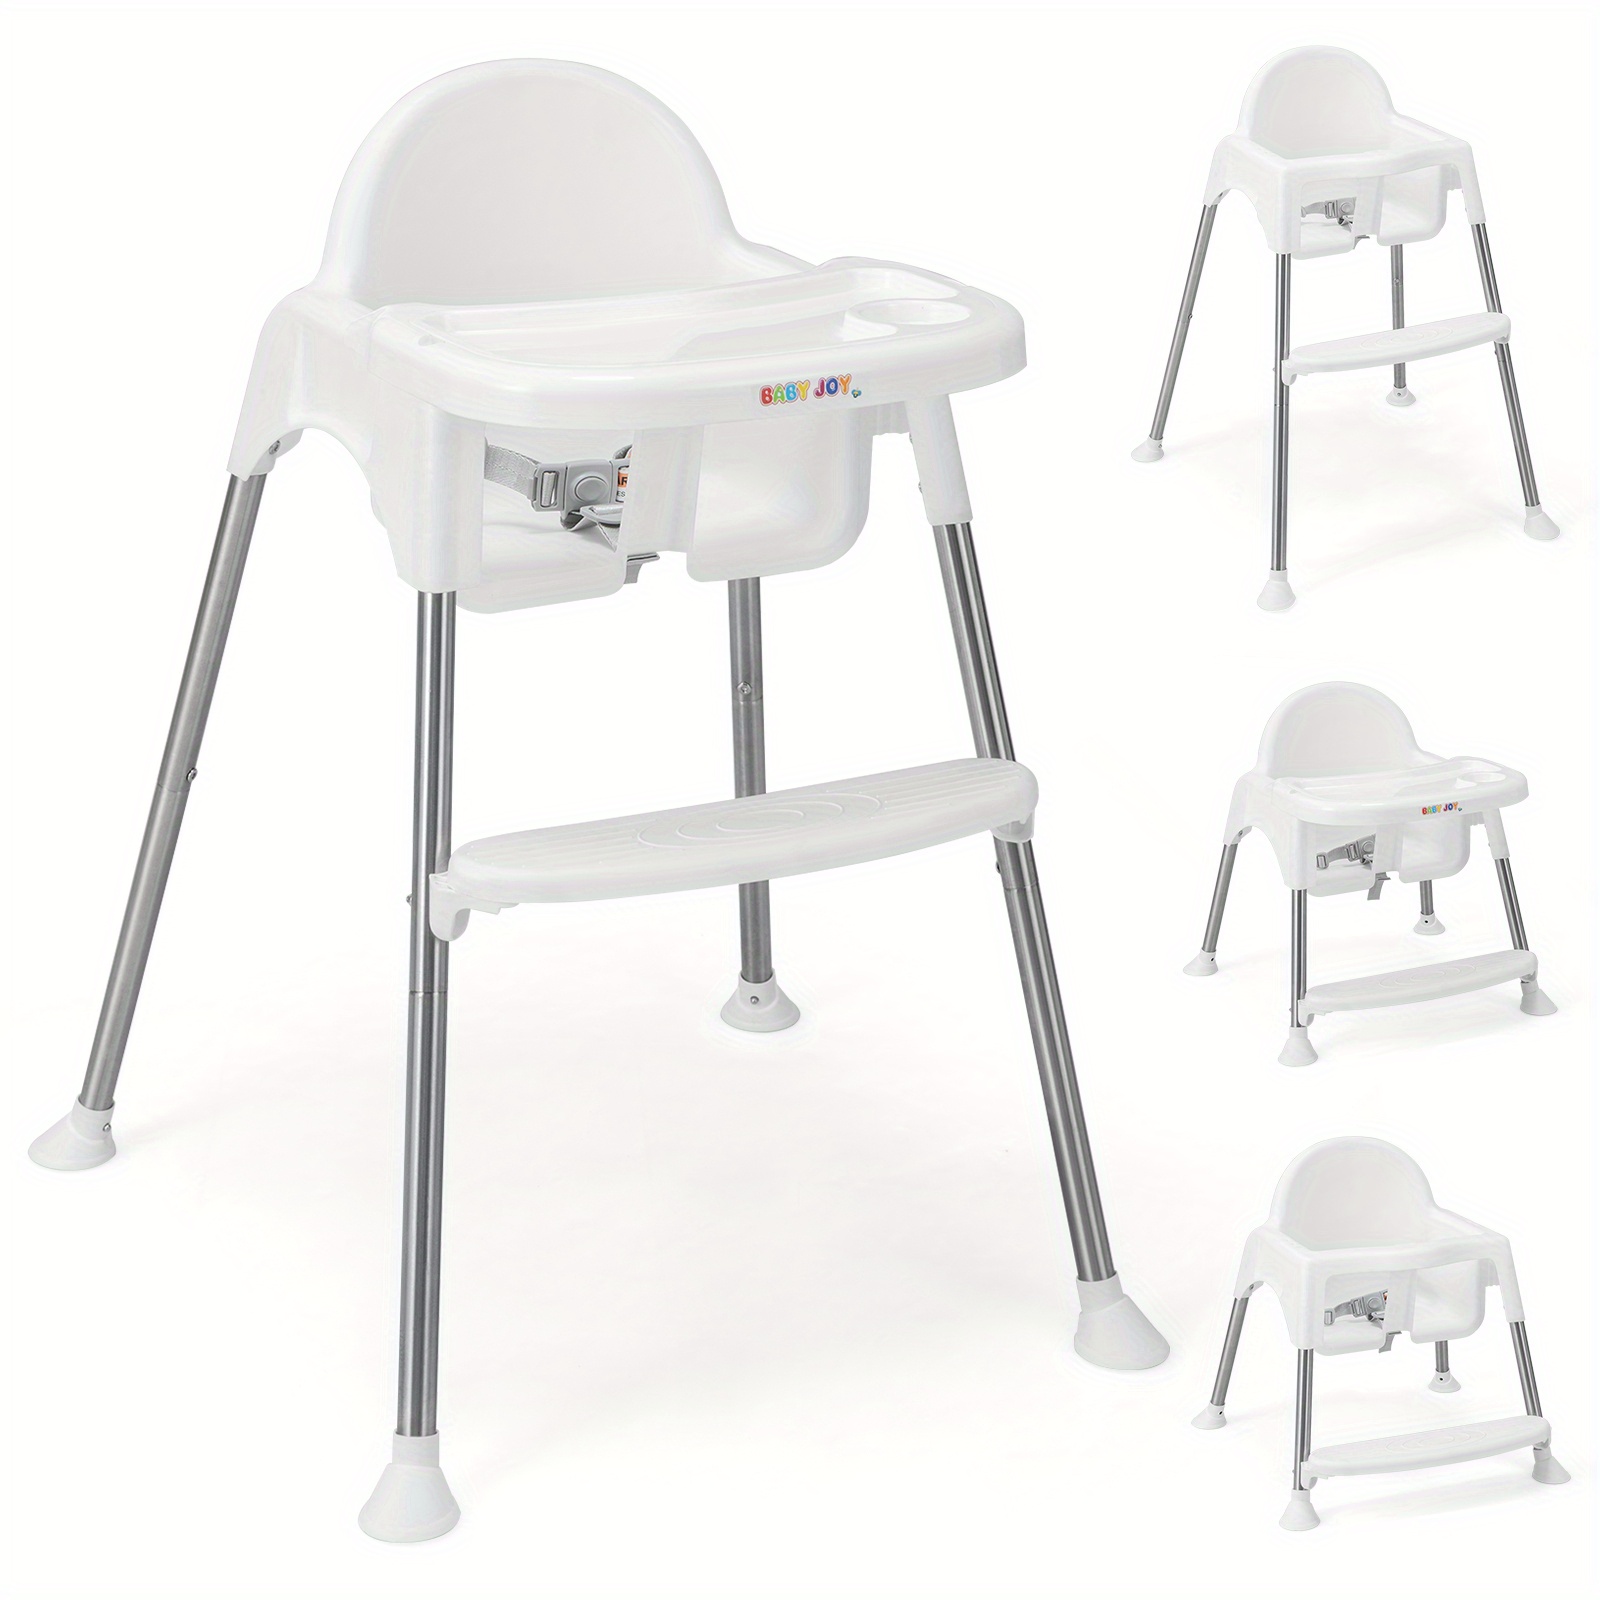 

Lifezeal 4-in-1 Convertible Baby High Chair Feeding W/ Removable Double Tray& Footrest